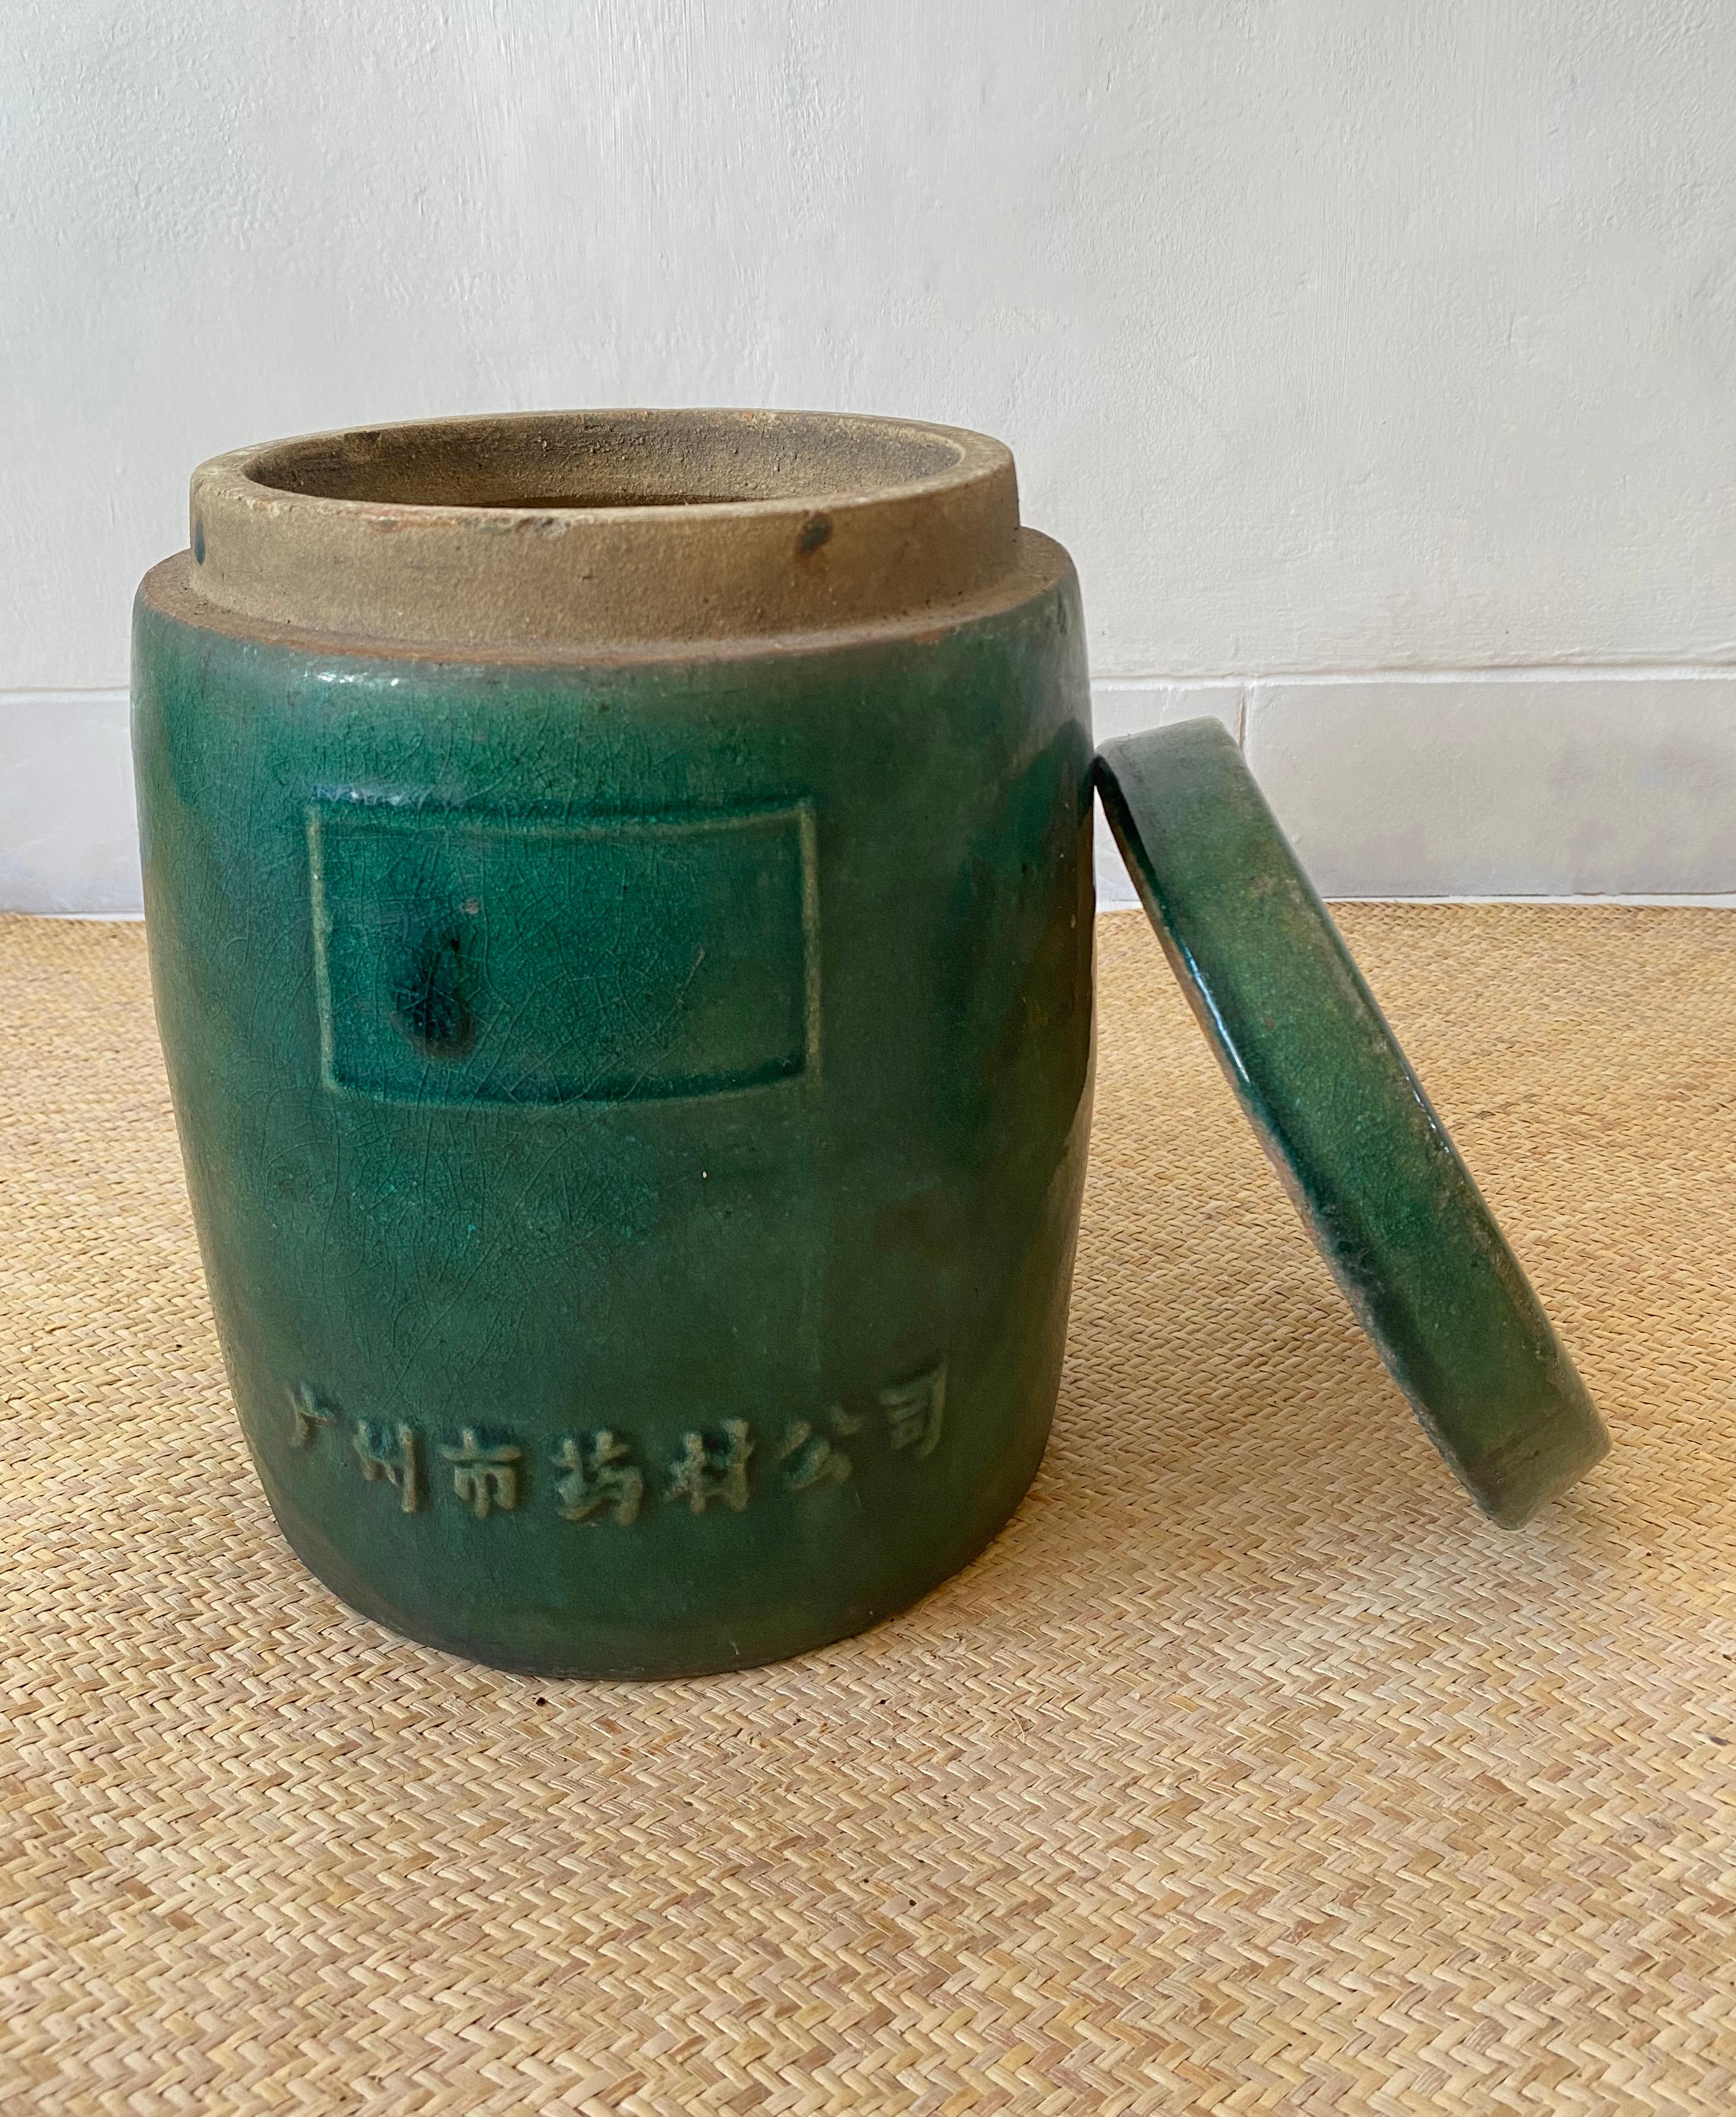 At the turn of the 20th century Chinese medicine businesses were highly successful enterprises, the vast majority of these operating out of Guangzhou. This lidded container was used to transport medicinal herbs and spices. The flat lid and barrel